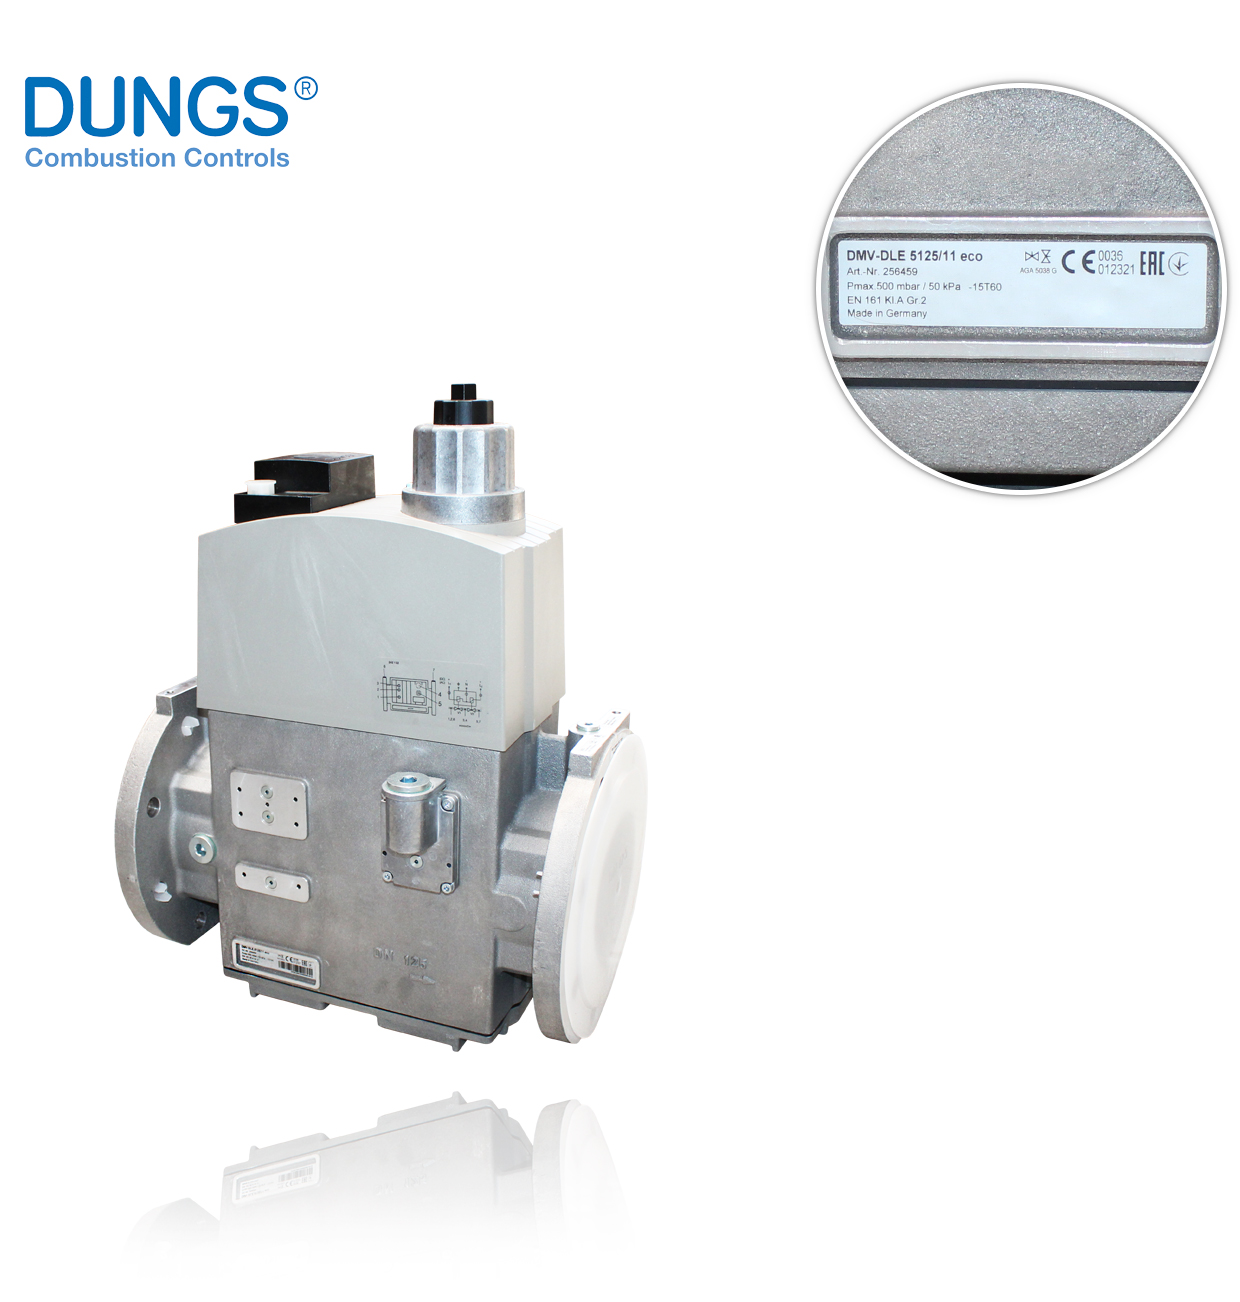 DMV-DLE ECO 5125/1  DN125  230V  50-60 HZ (256459) DUNGS DOUBLE SOLENOID VALVE